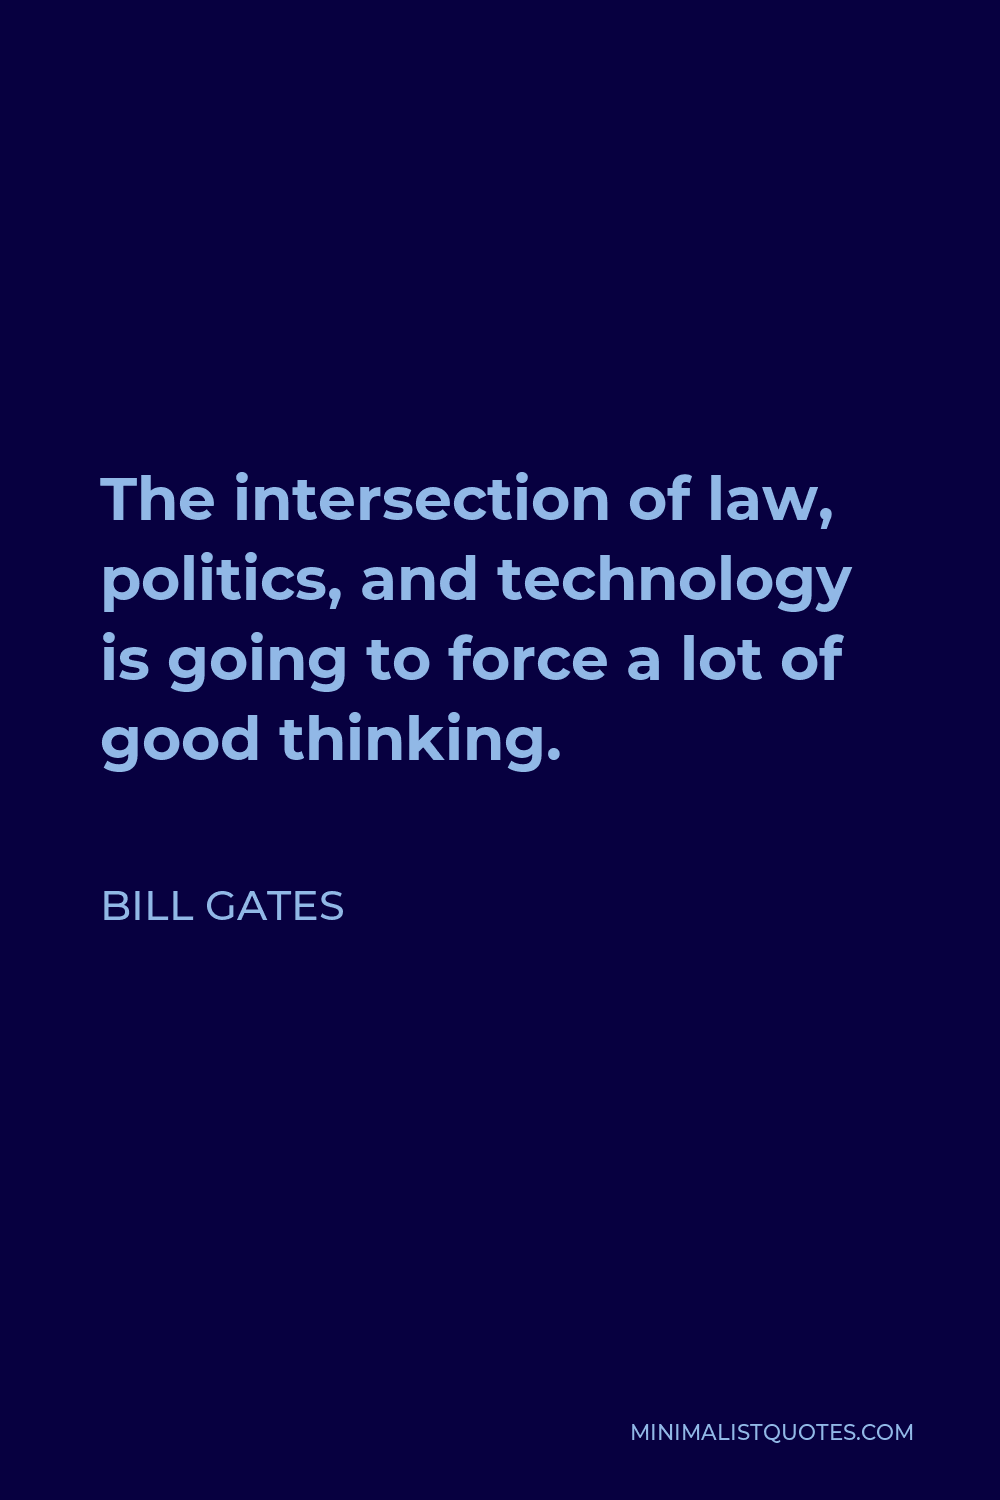 Bill Gates Quote - The intersection of law, politics, and technology is going to force a lot of good thinking.